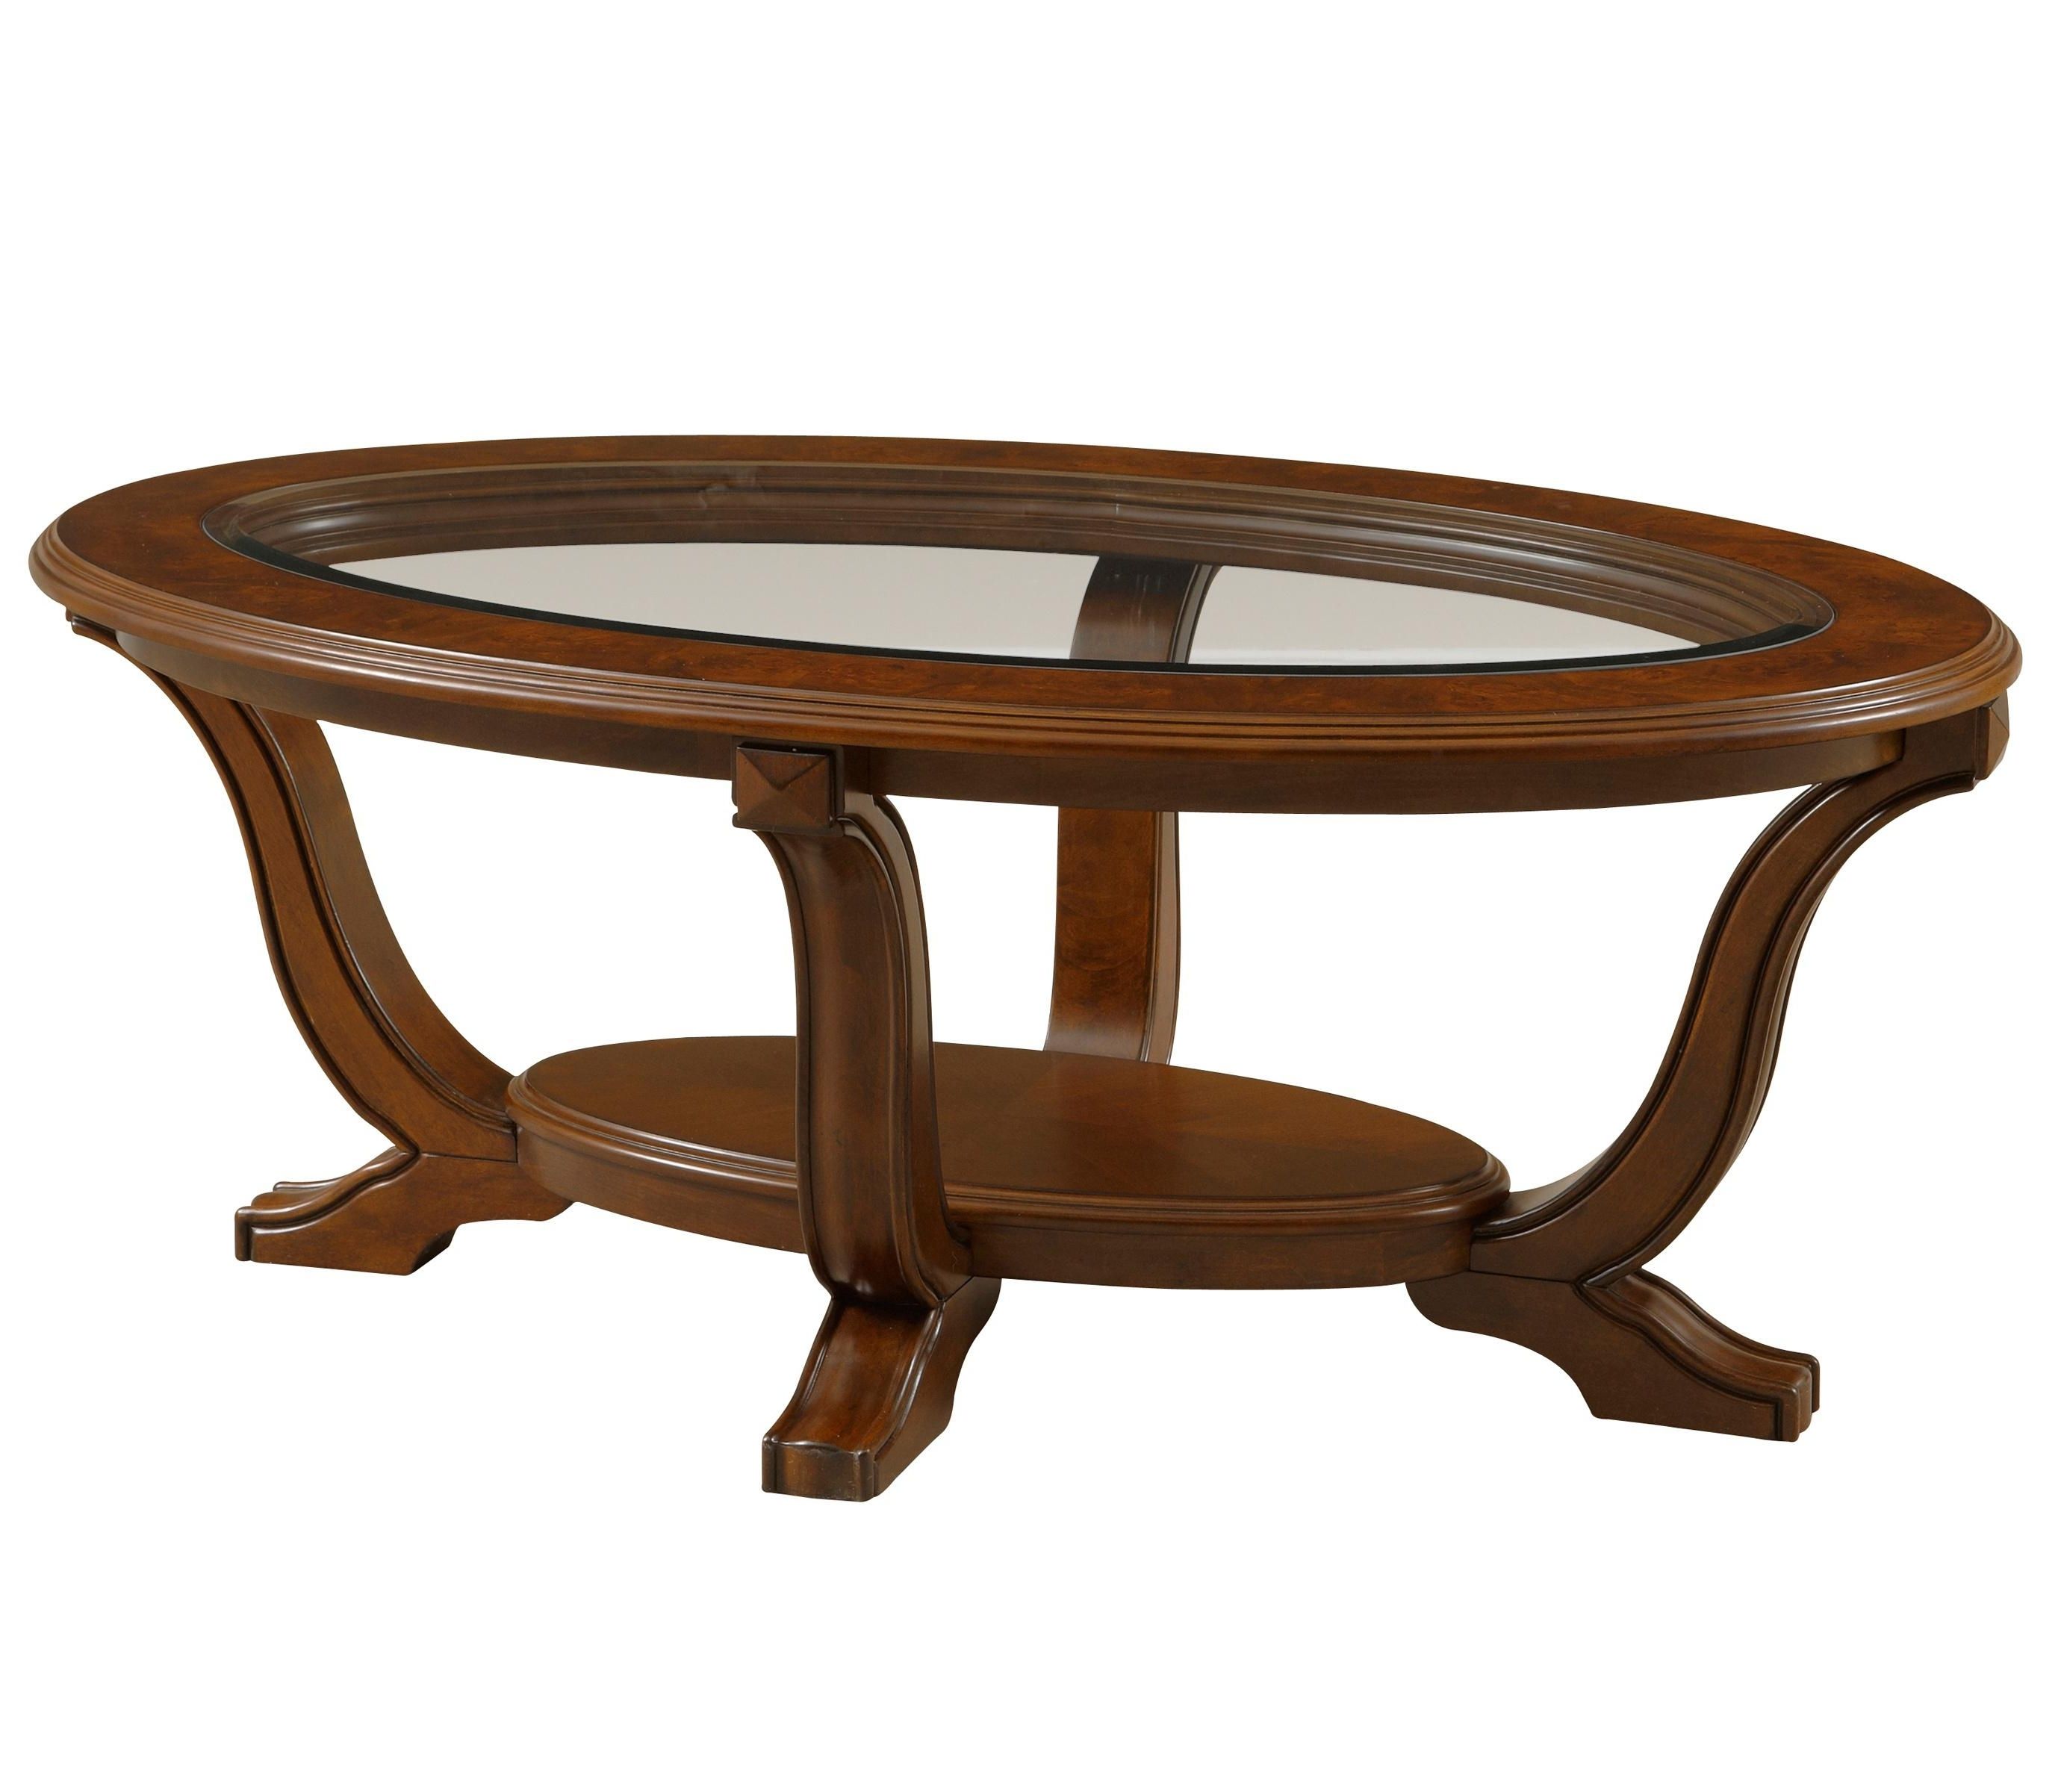 Preferred Exton Cocktail Tables In Broyhill Furniture Lana Oval Cocktail Table With Glass Top Insert (Gallery 4 of 20)